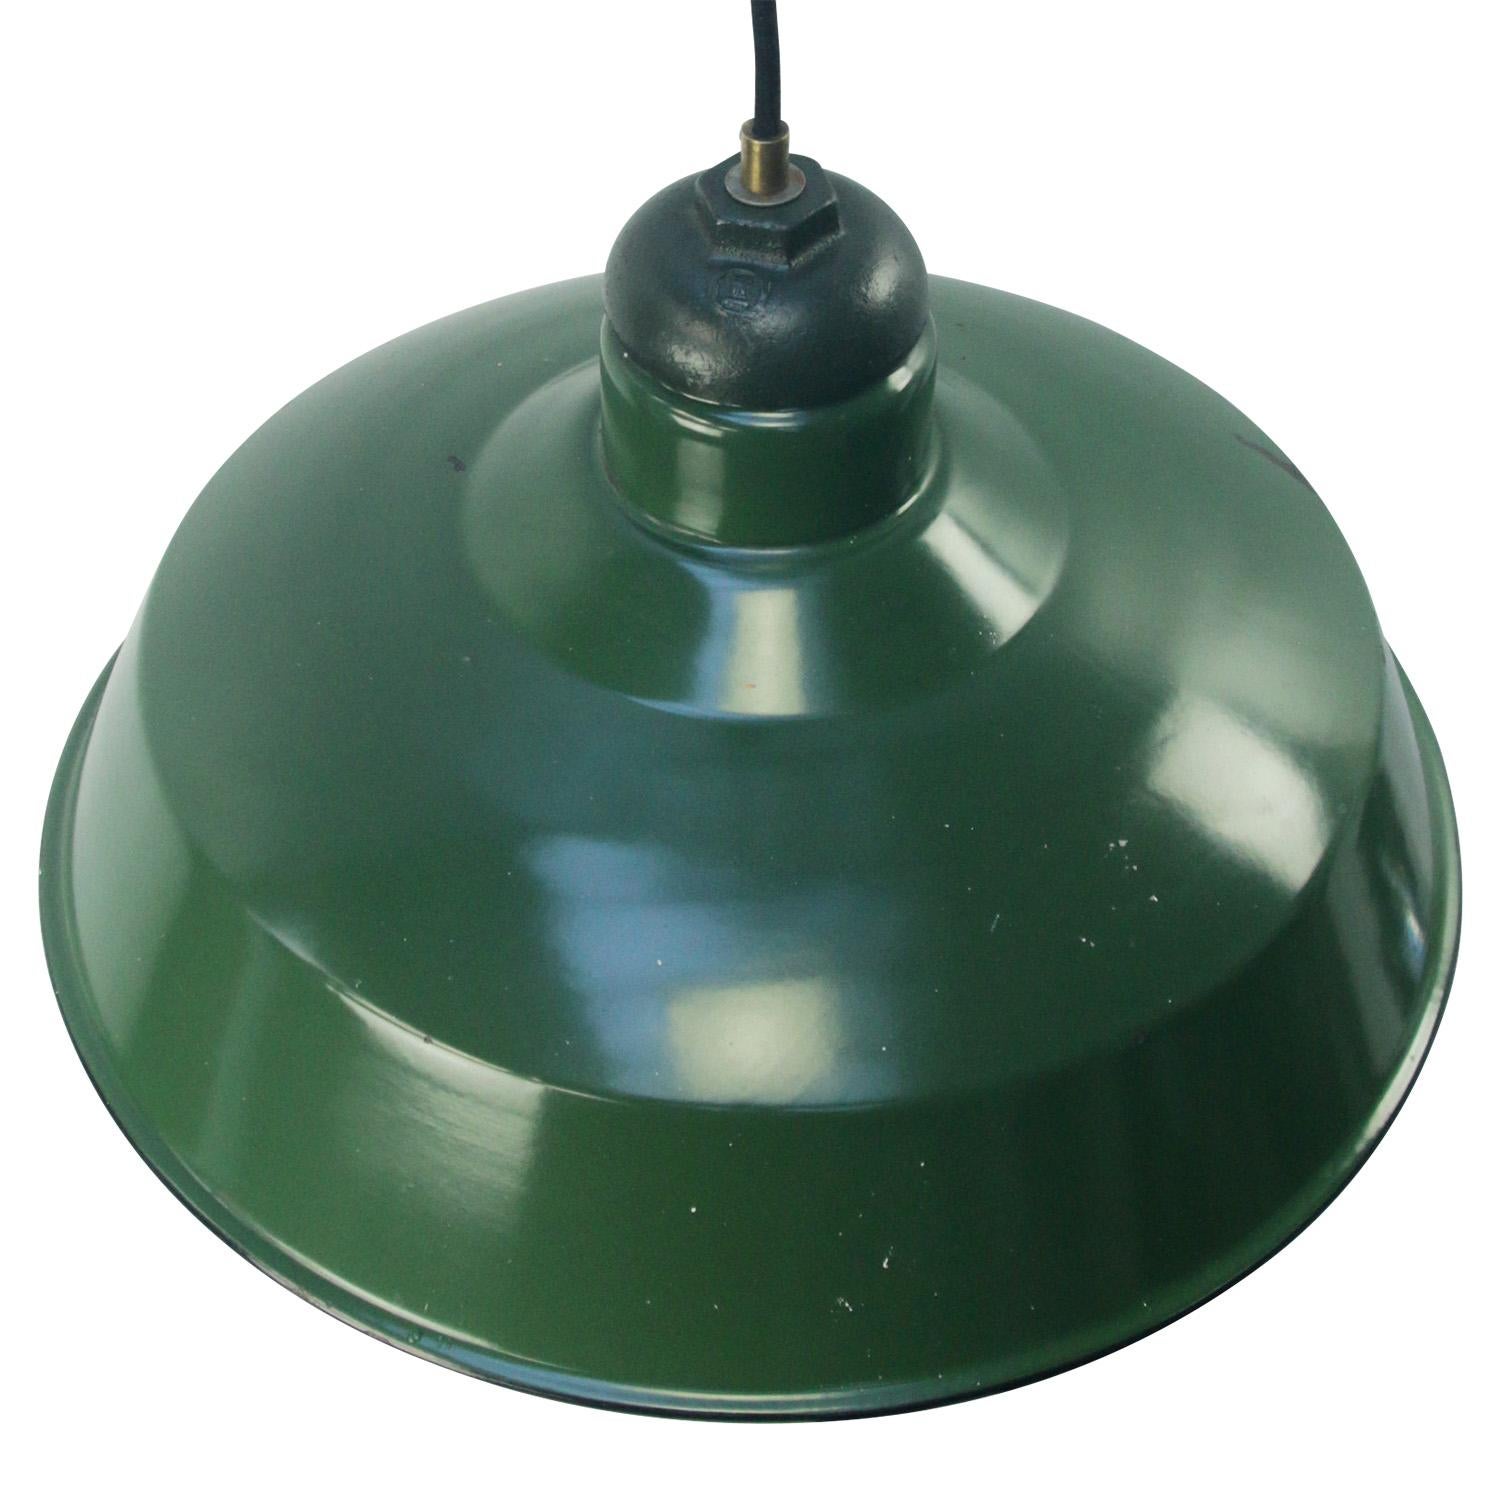 Vintage American green enamel industrial pendant lamp
Cast iron top
White interior

Weight: 2.40 kg / 5.3 lb

Priced per individual item. All lamps have been made suitable by international standards for incandescent light bulbs,